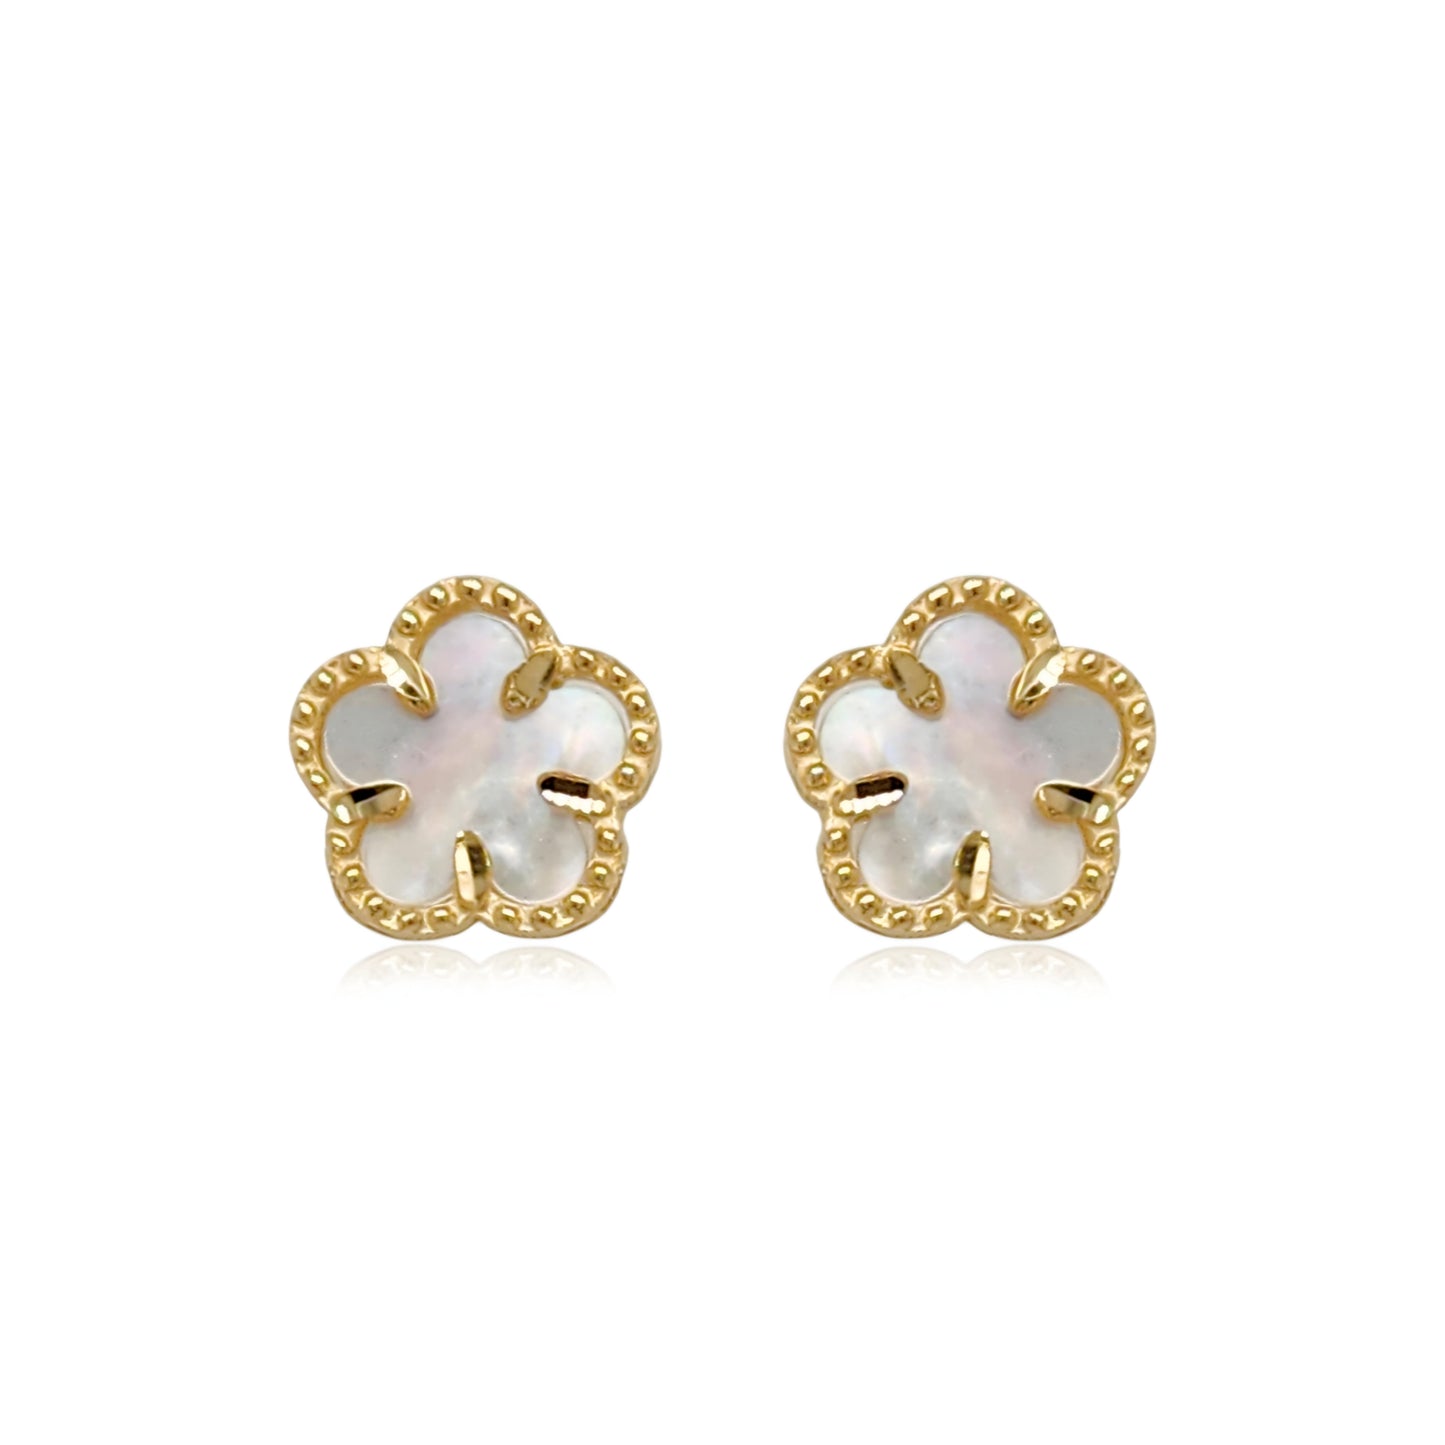 14k Gold Mother of Pearl Flower Stud Earrings with Beaded Border